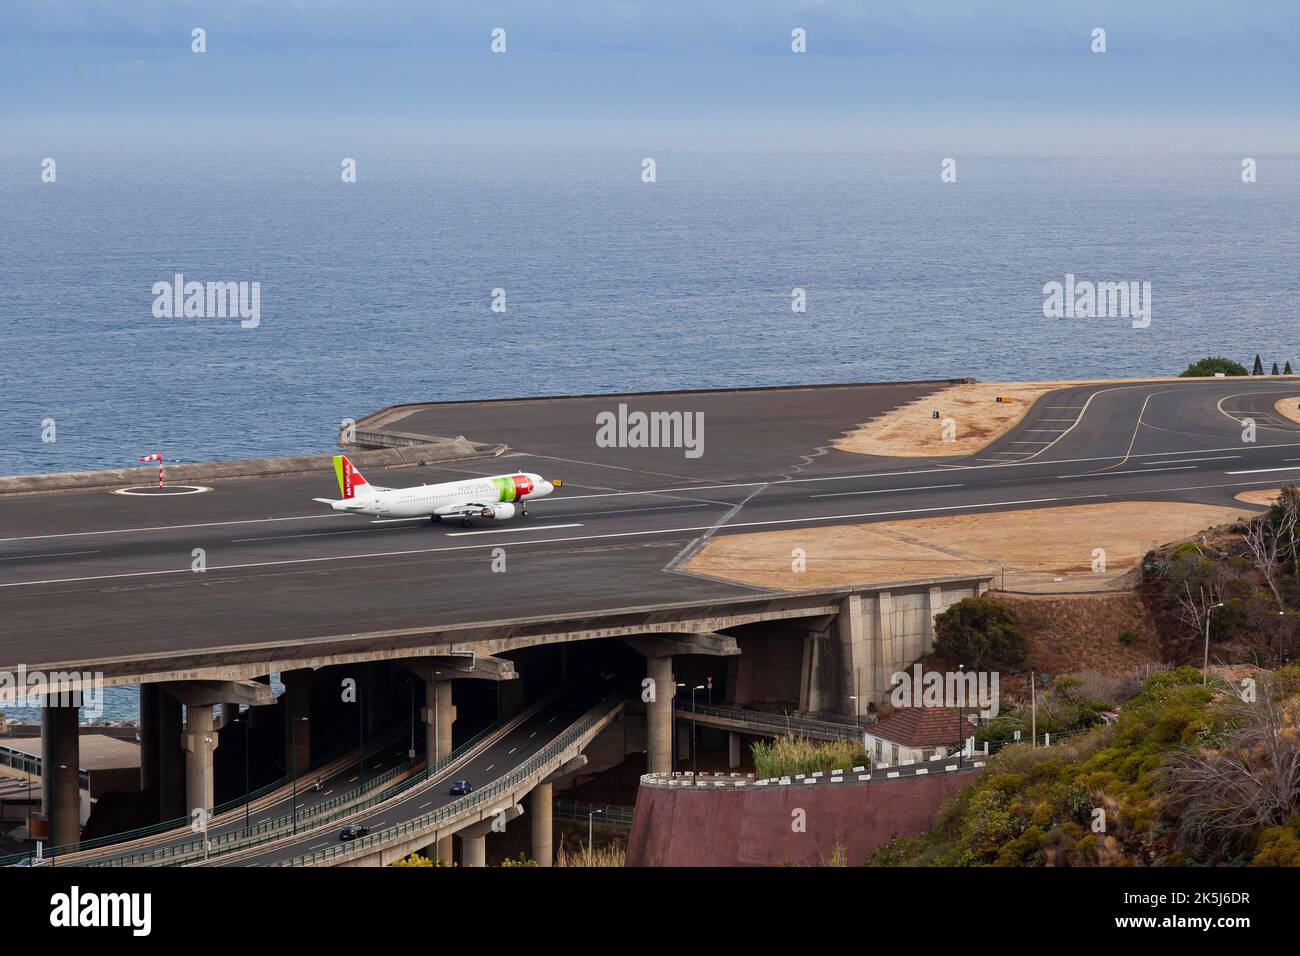 Airbus from TAP Portugal approaching the runway of Madeira Airport LPMA, also known as Funchal Airport and Santa Catarina Airport, next to a busy Stock Photo